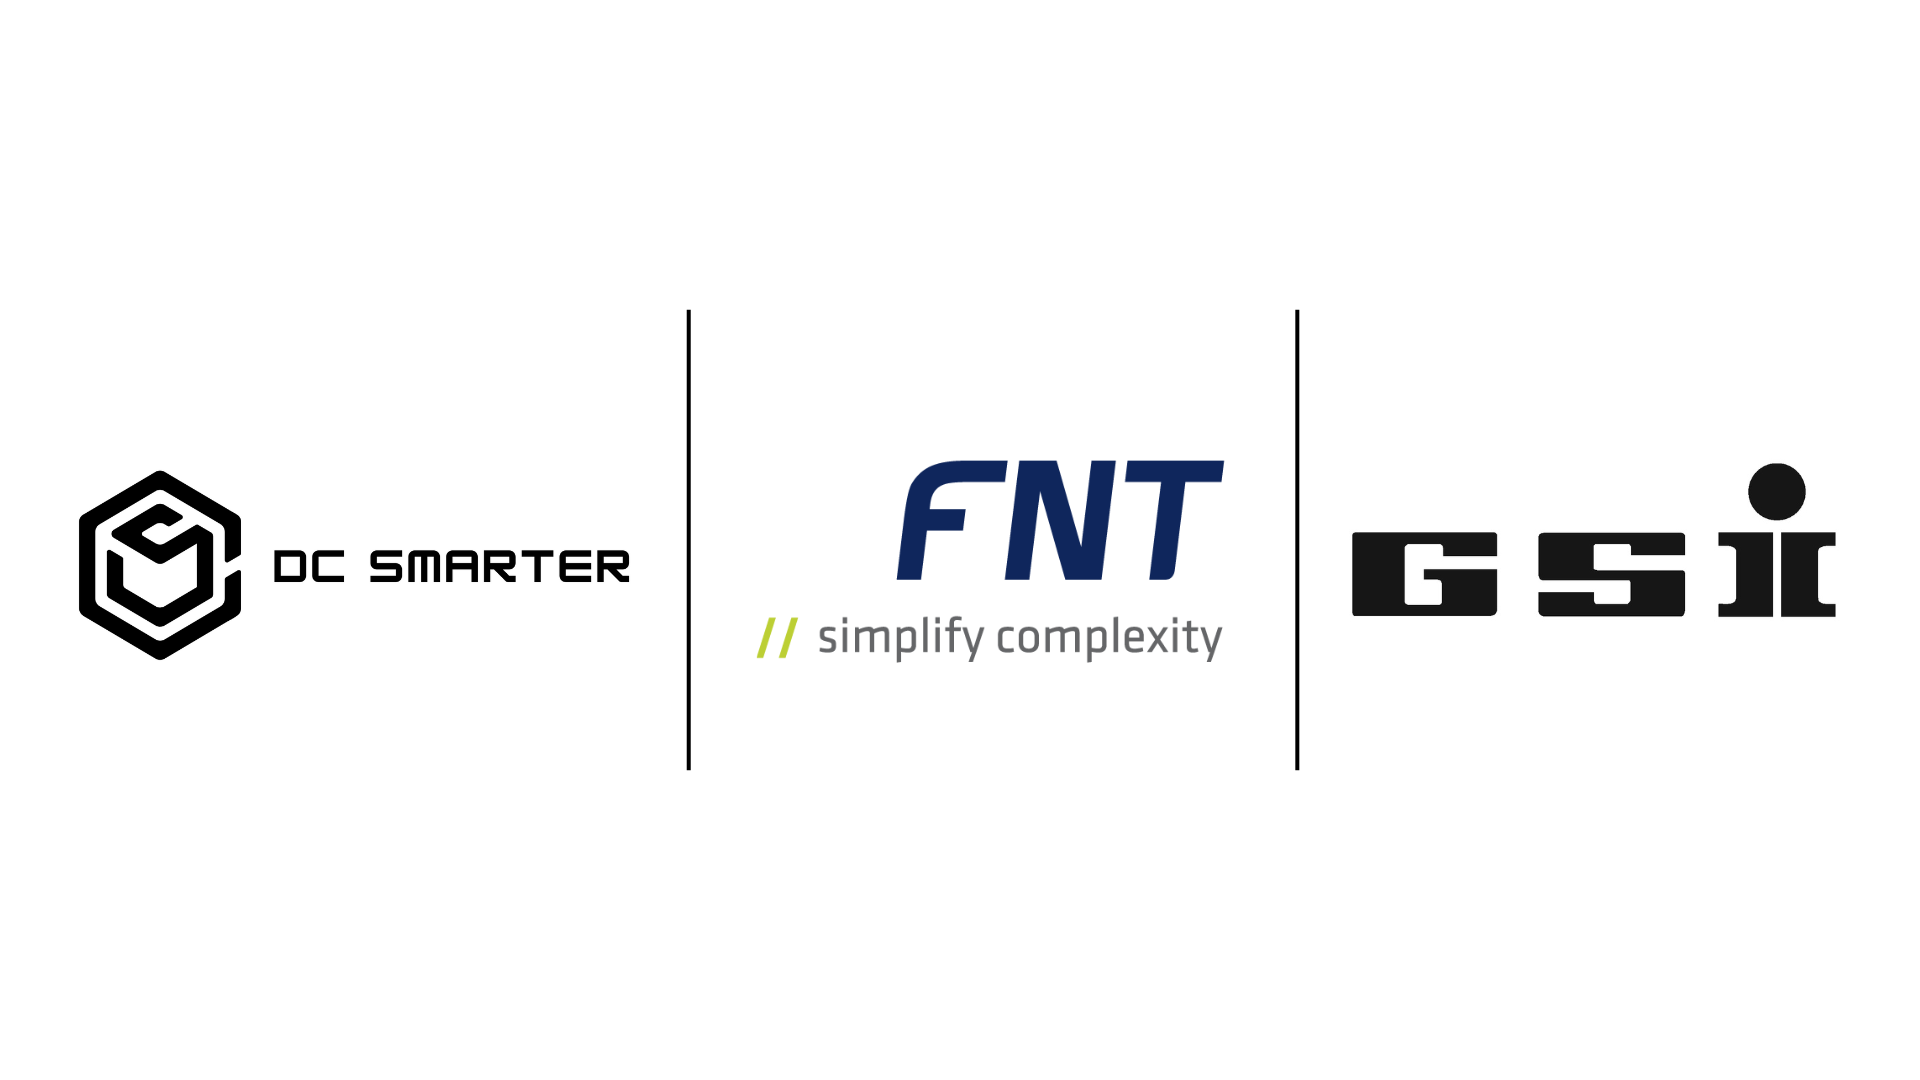 DC Smarter and FNT Software Collaborate with the GSI Helmholtz Center for Heavy Ion Research to Drive Sustainable and Smart Data Center Operations